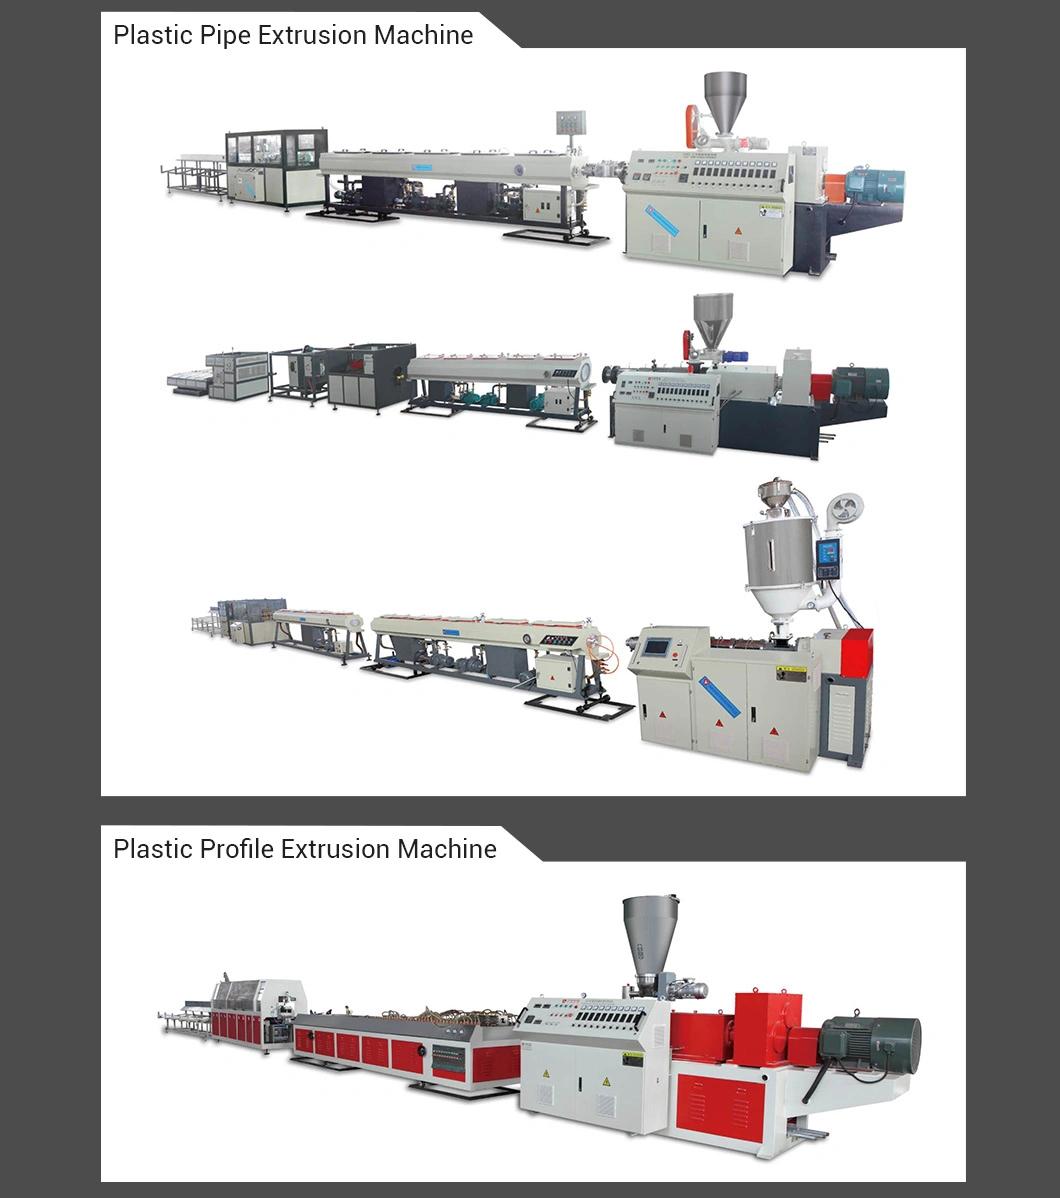 Automatic Plastic Recycling Machine with CE, ISO, TUV, SGS